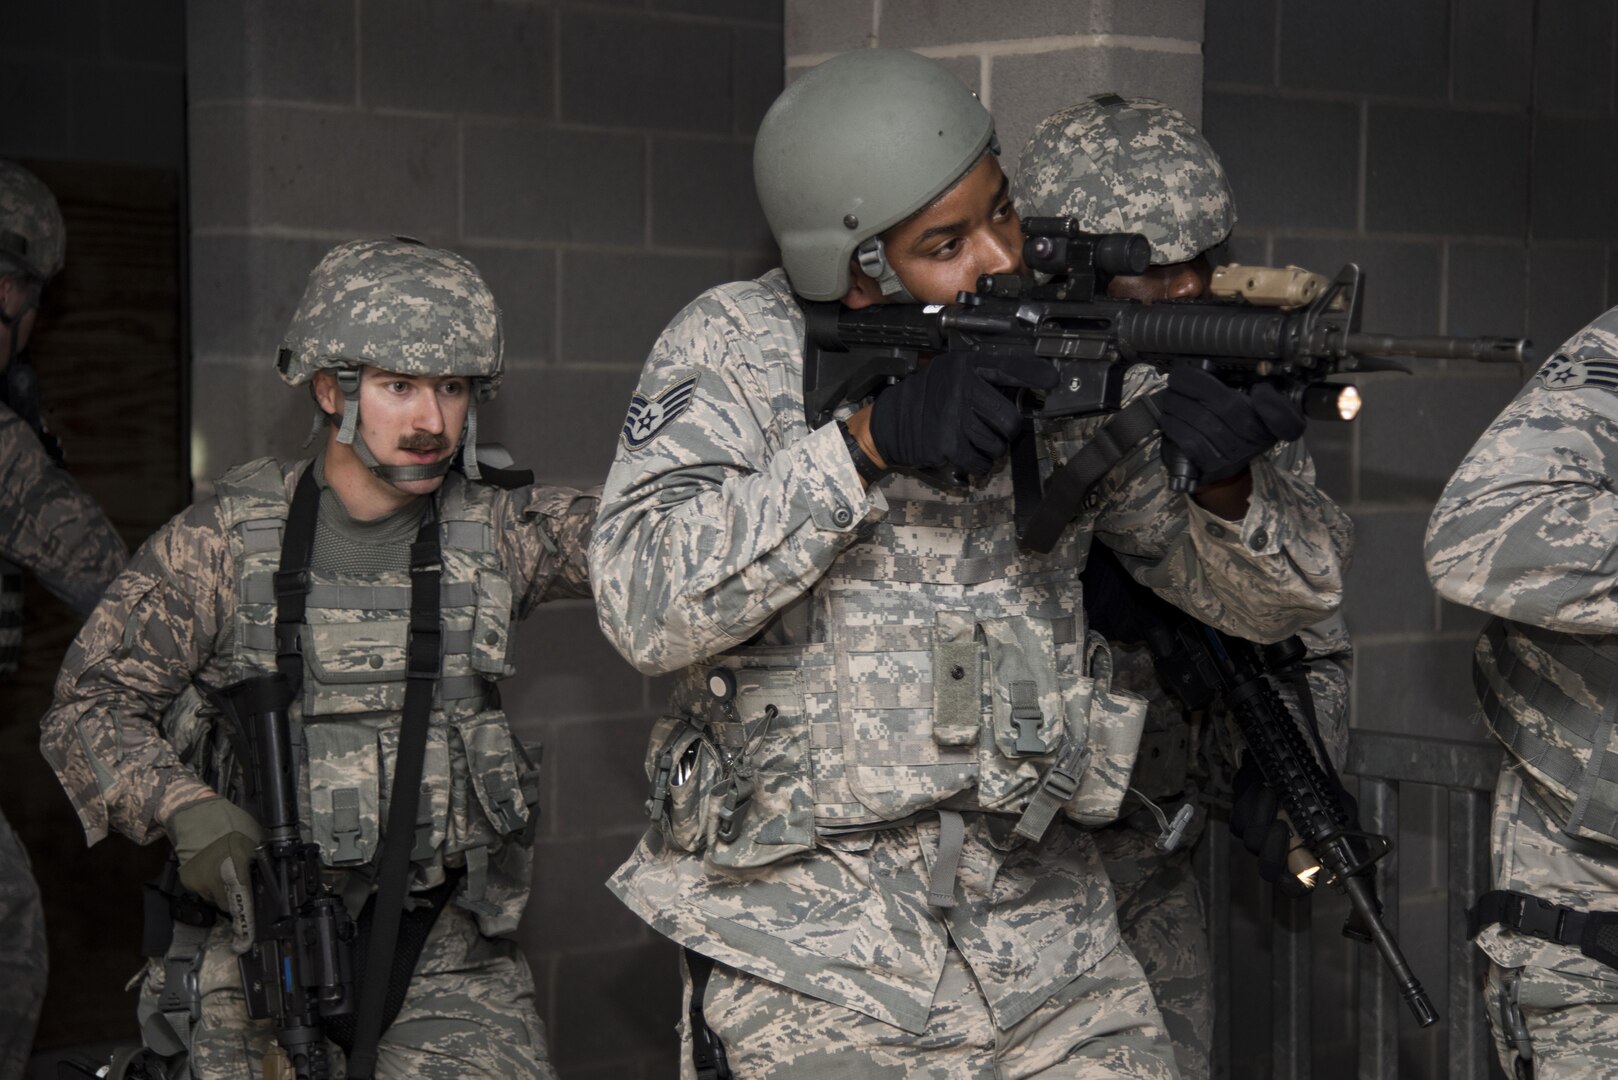 502nd Security and Readiness Group security forces Airmen practice clearing a building June 9, 2017, at Joint Base San Antonio-Camp Bullis, Texas. Thousands of service members train at JBSA-Camp Bullis every year to fulfill operational requirements, including security forces and combat medic training.